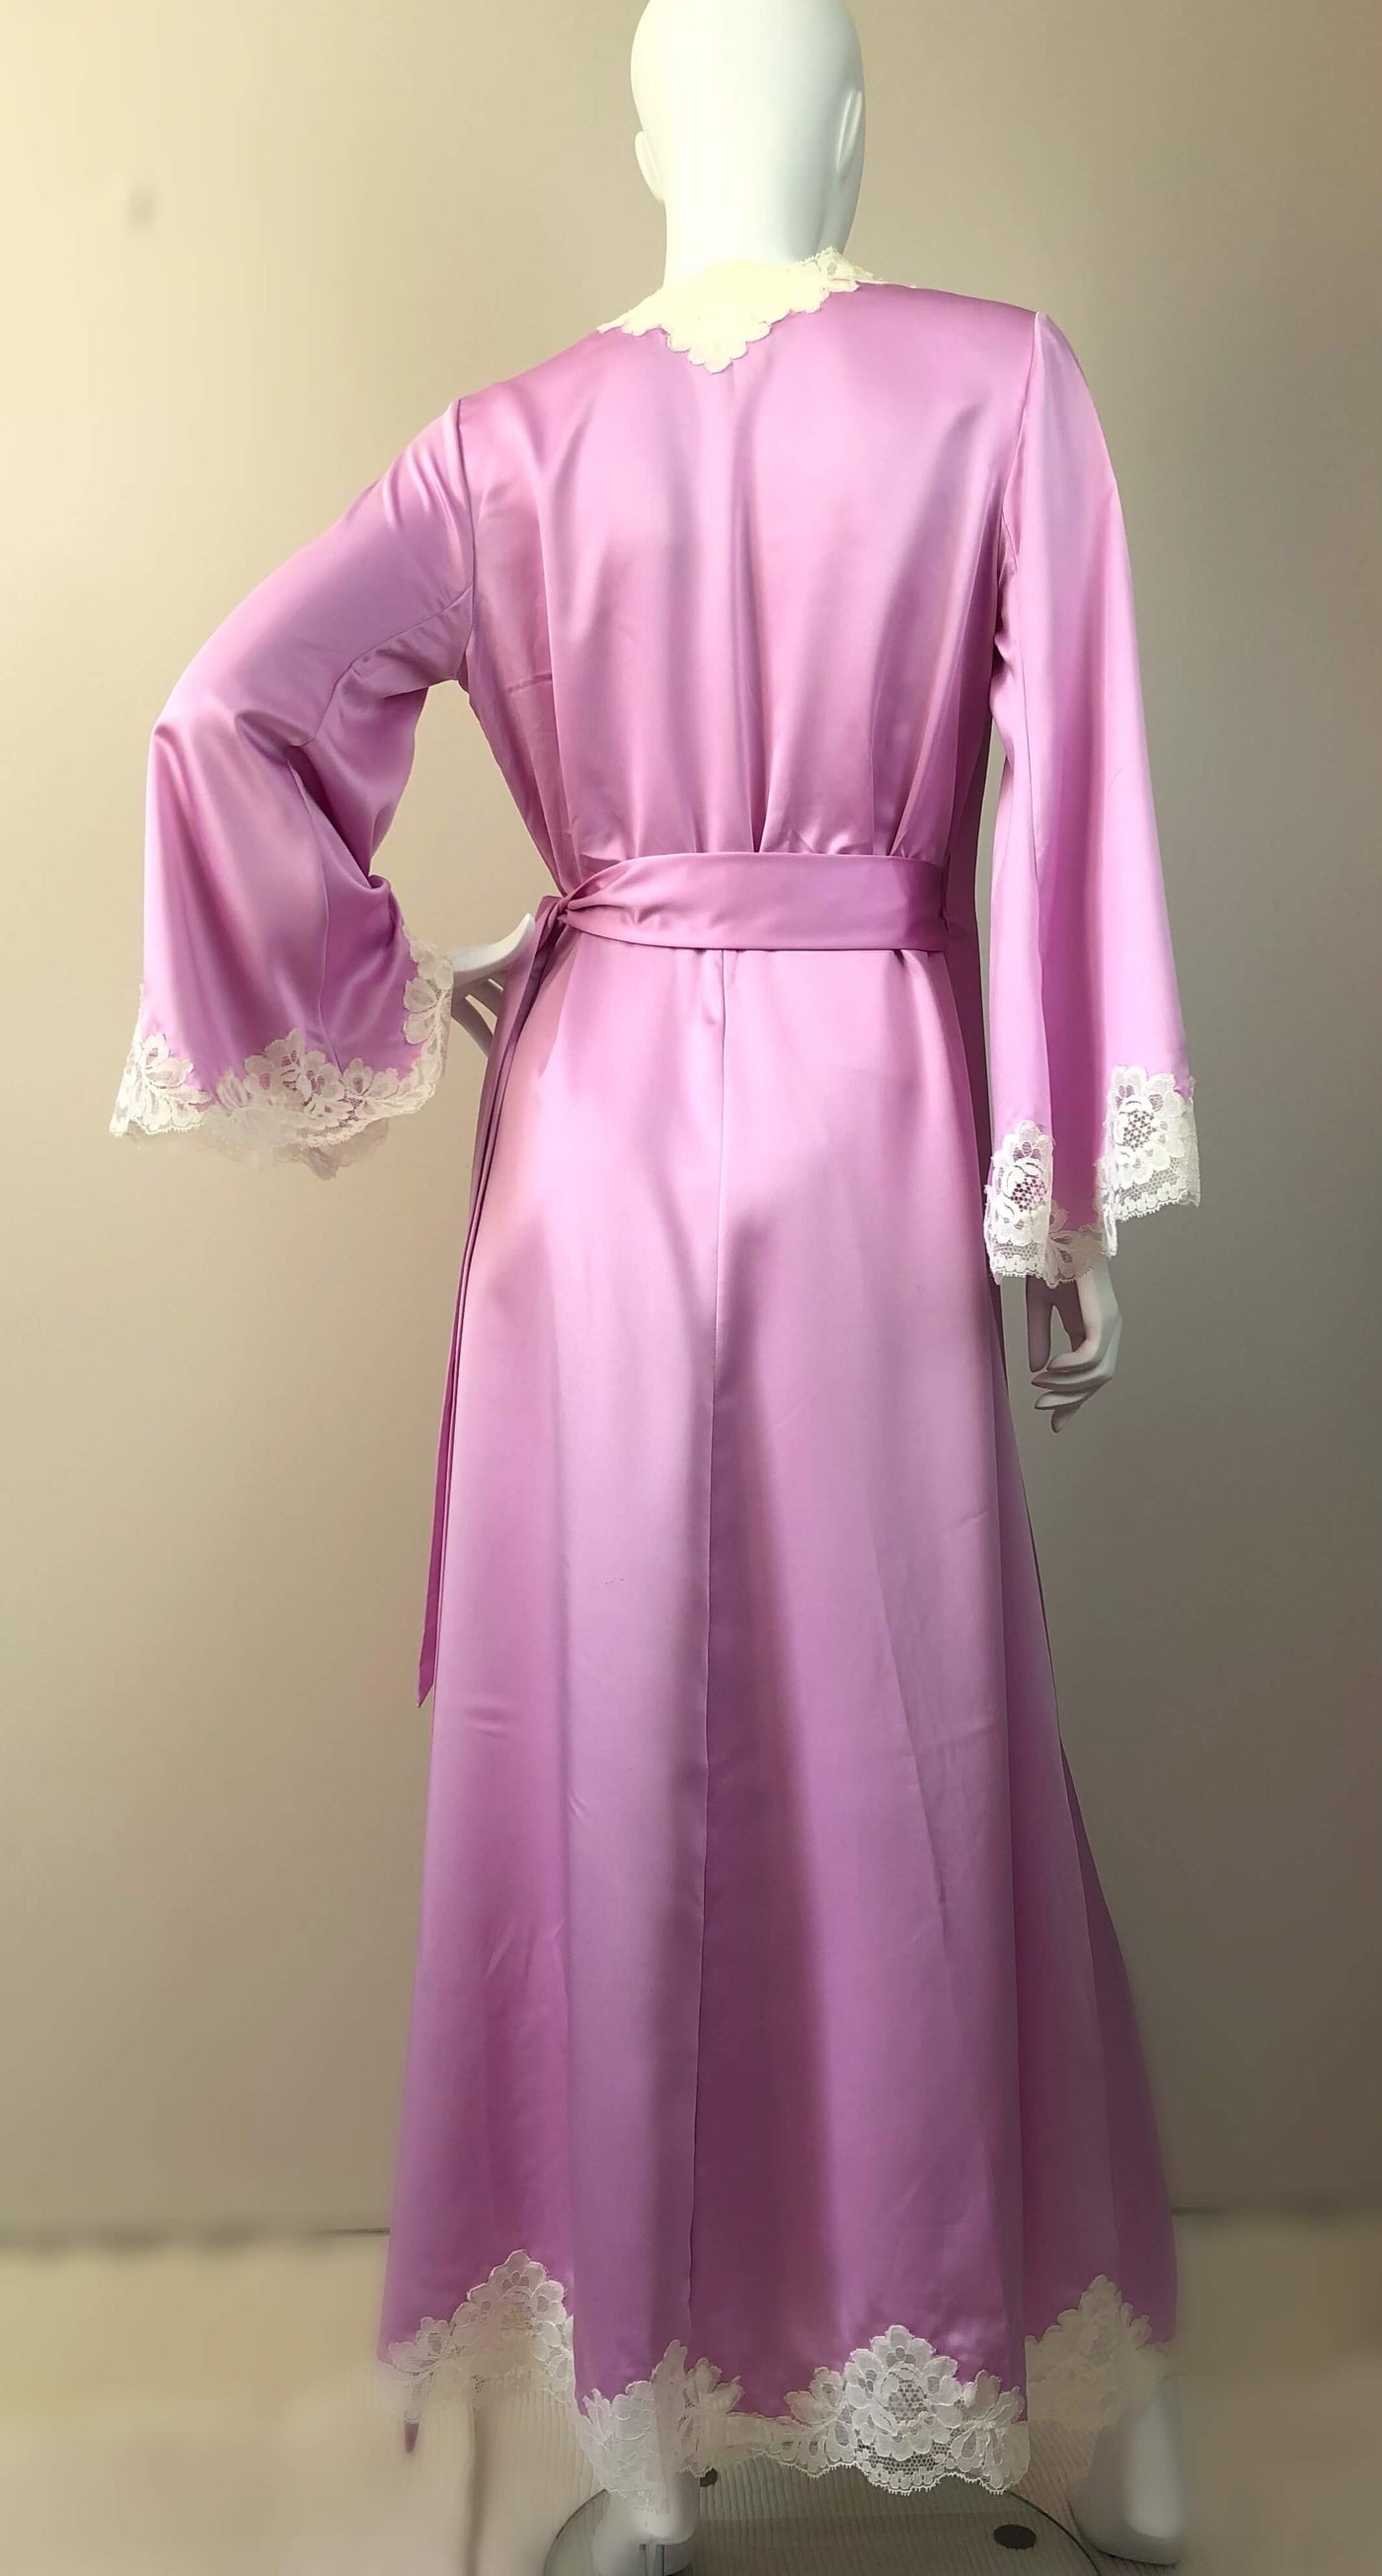 Lilac dressing gown